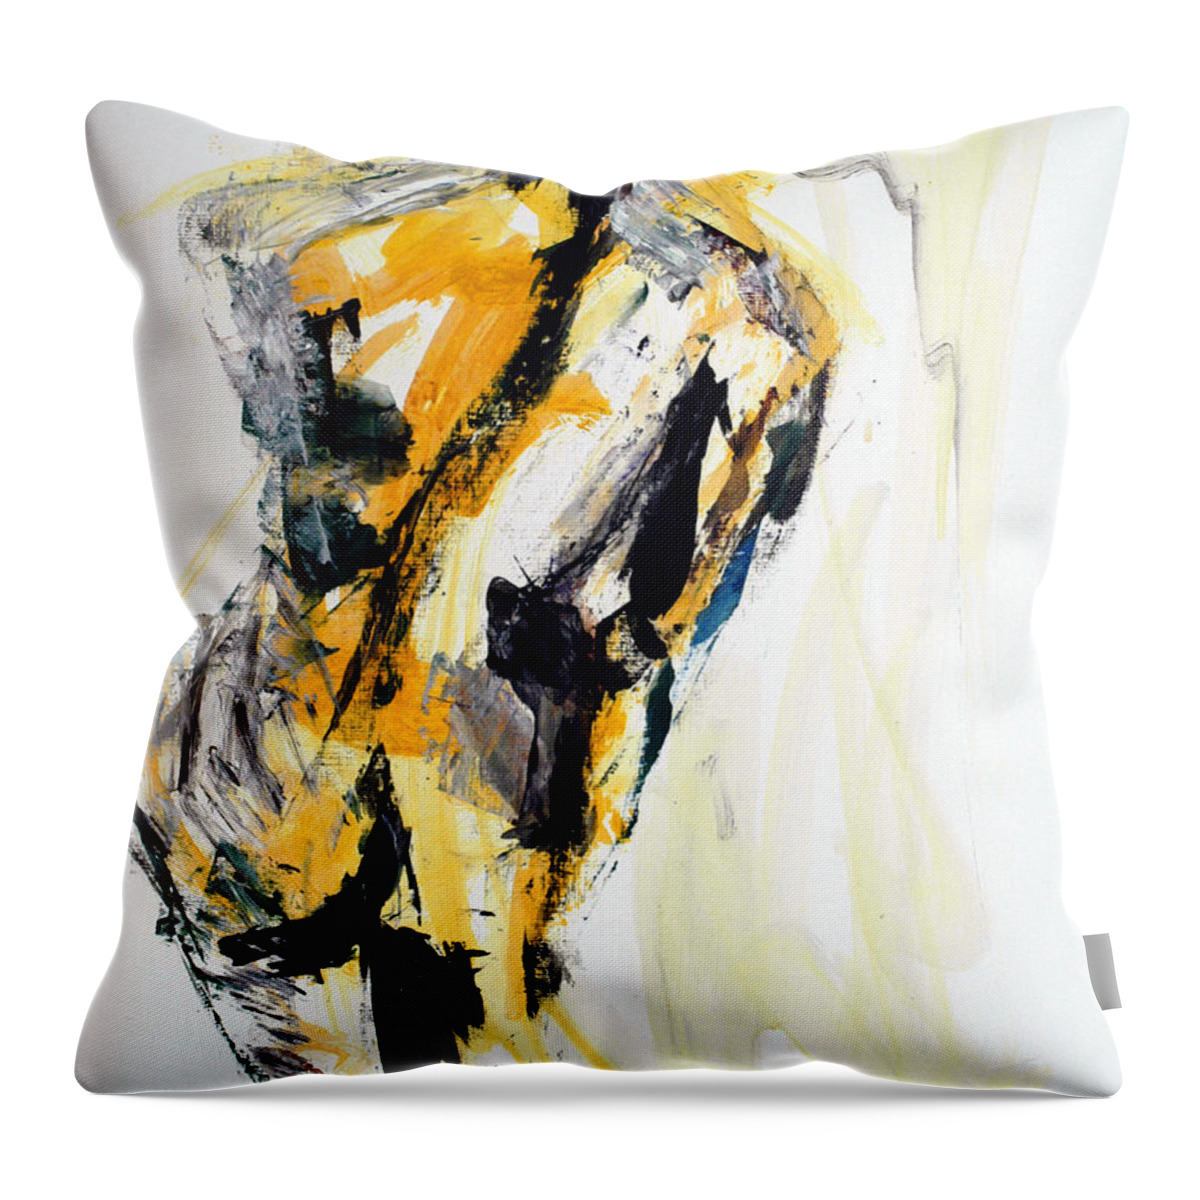 Male Throw Pillow featuring the painting 04016 Hot Foot by AnneKarin Glass